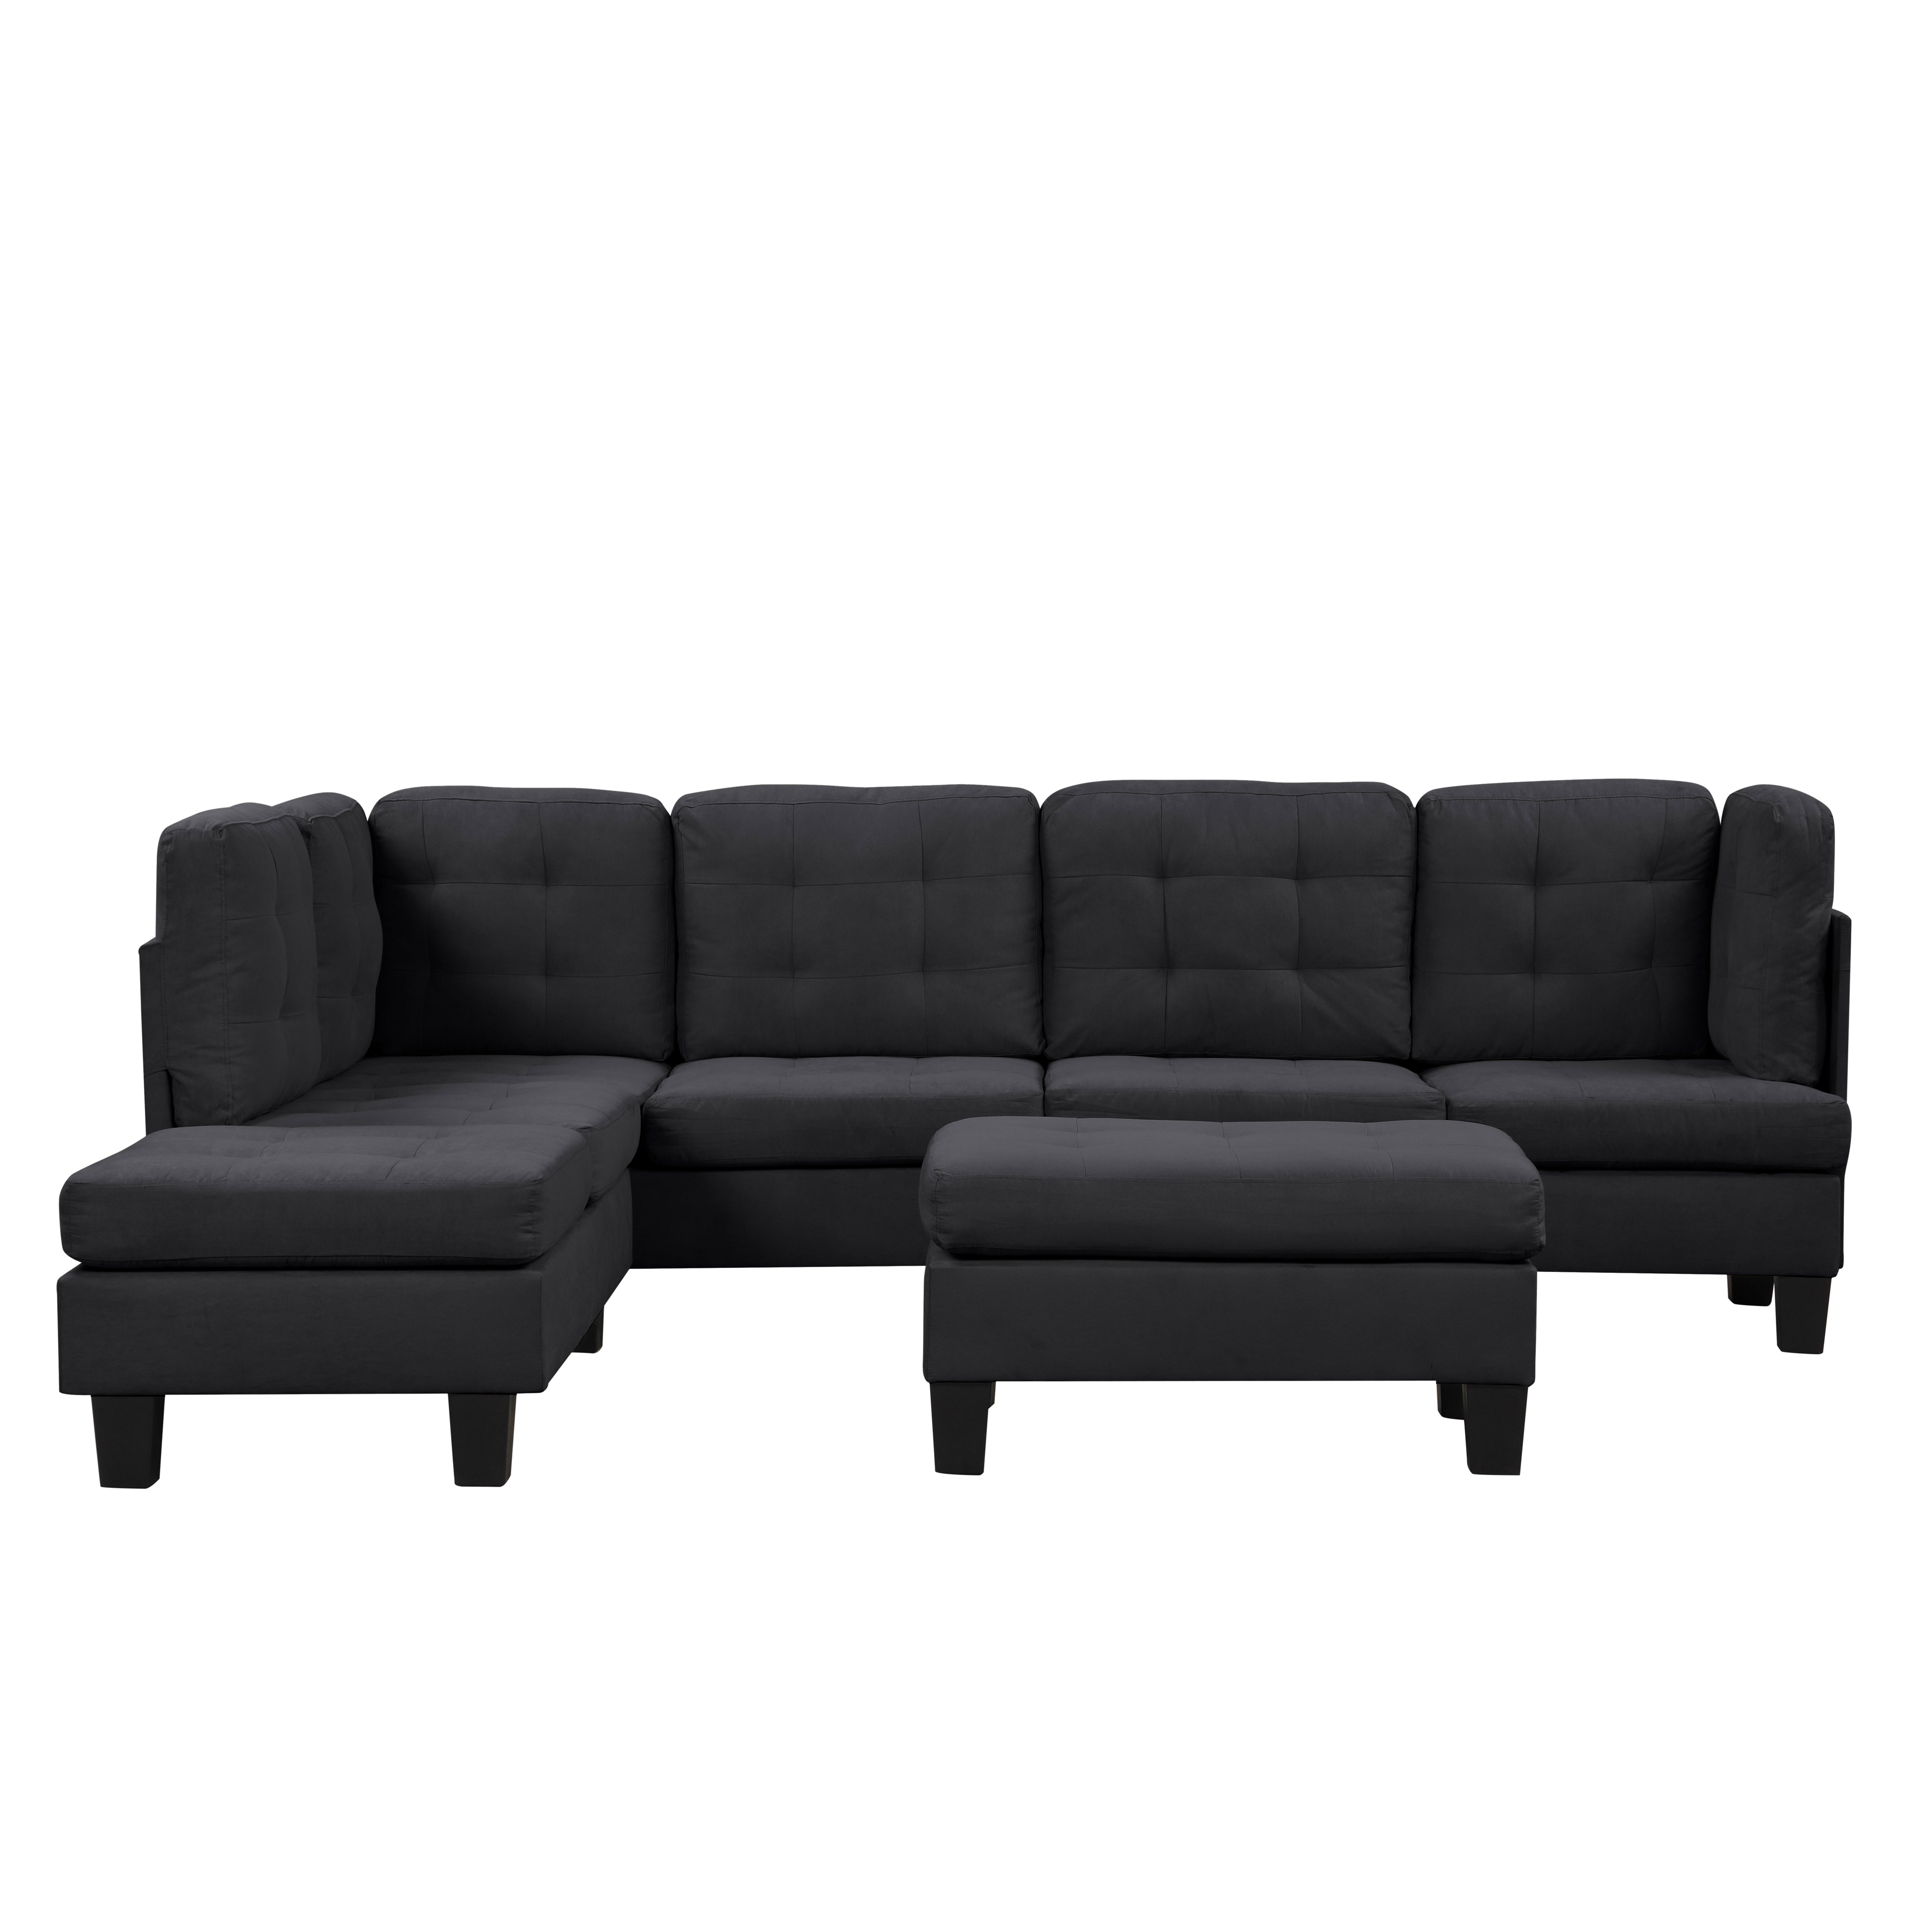 3 Piece Sectional And Ottoman Set